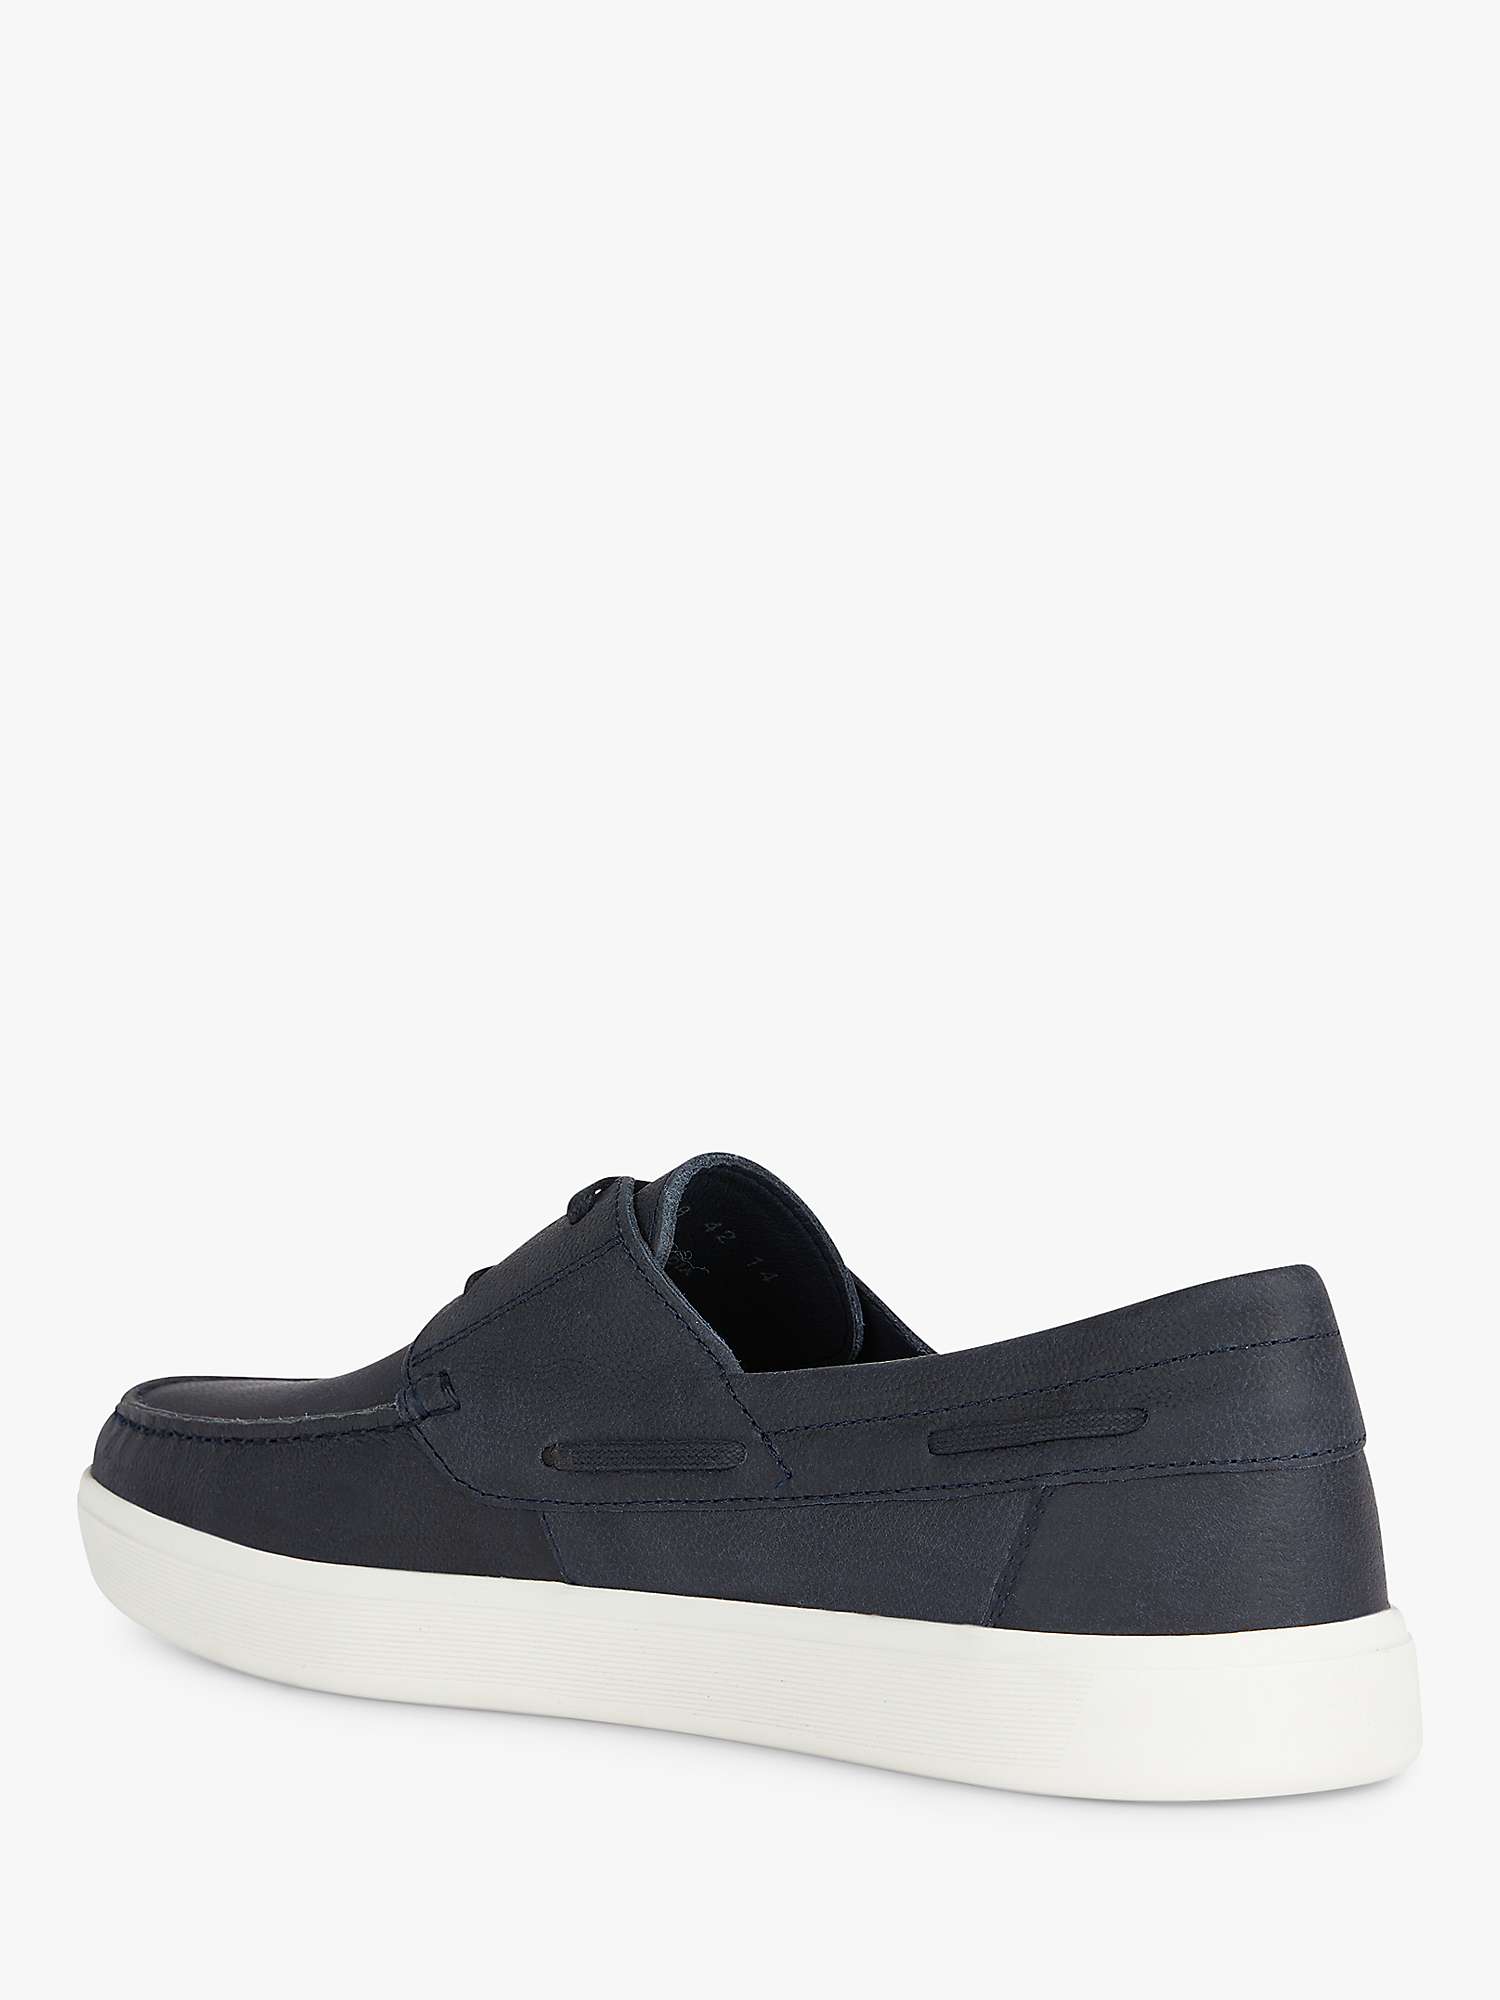 Buy Geox Avola Leather Loafers, Navy Online at johnlewis.com